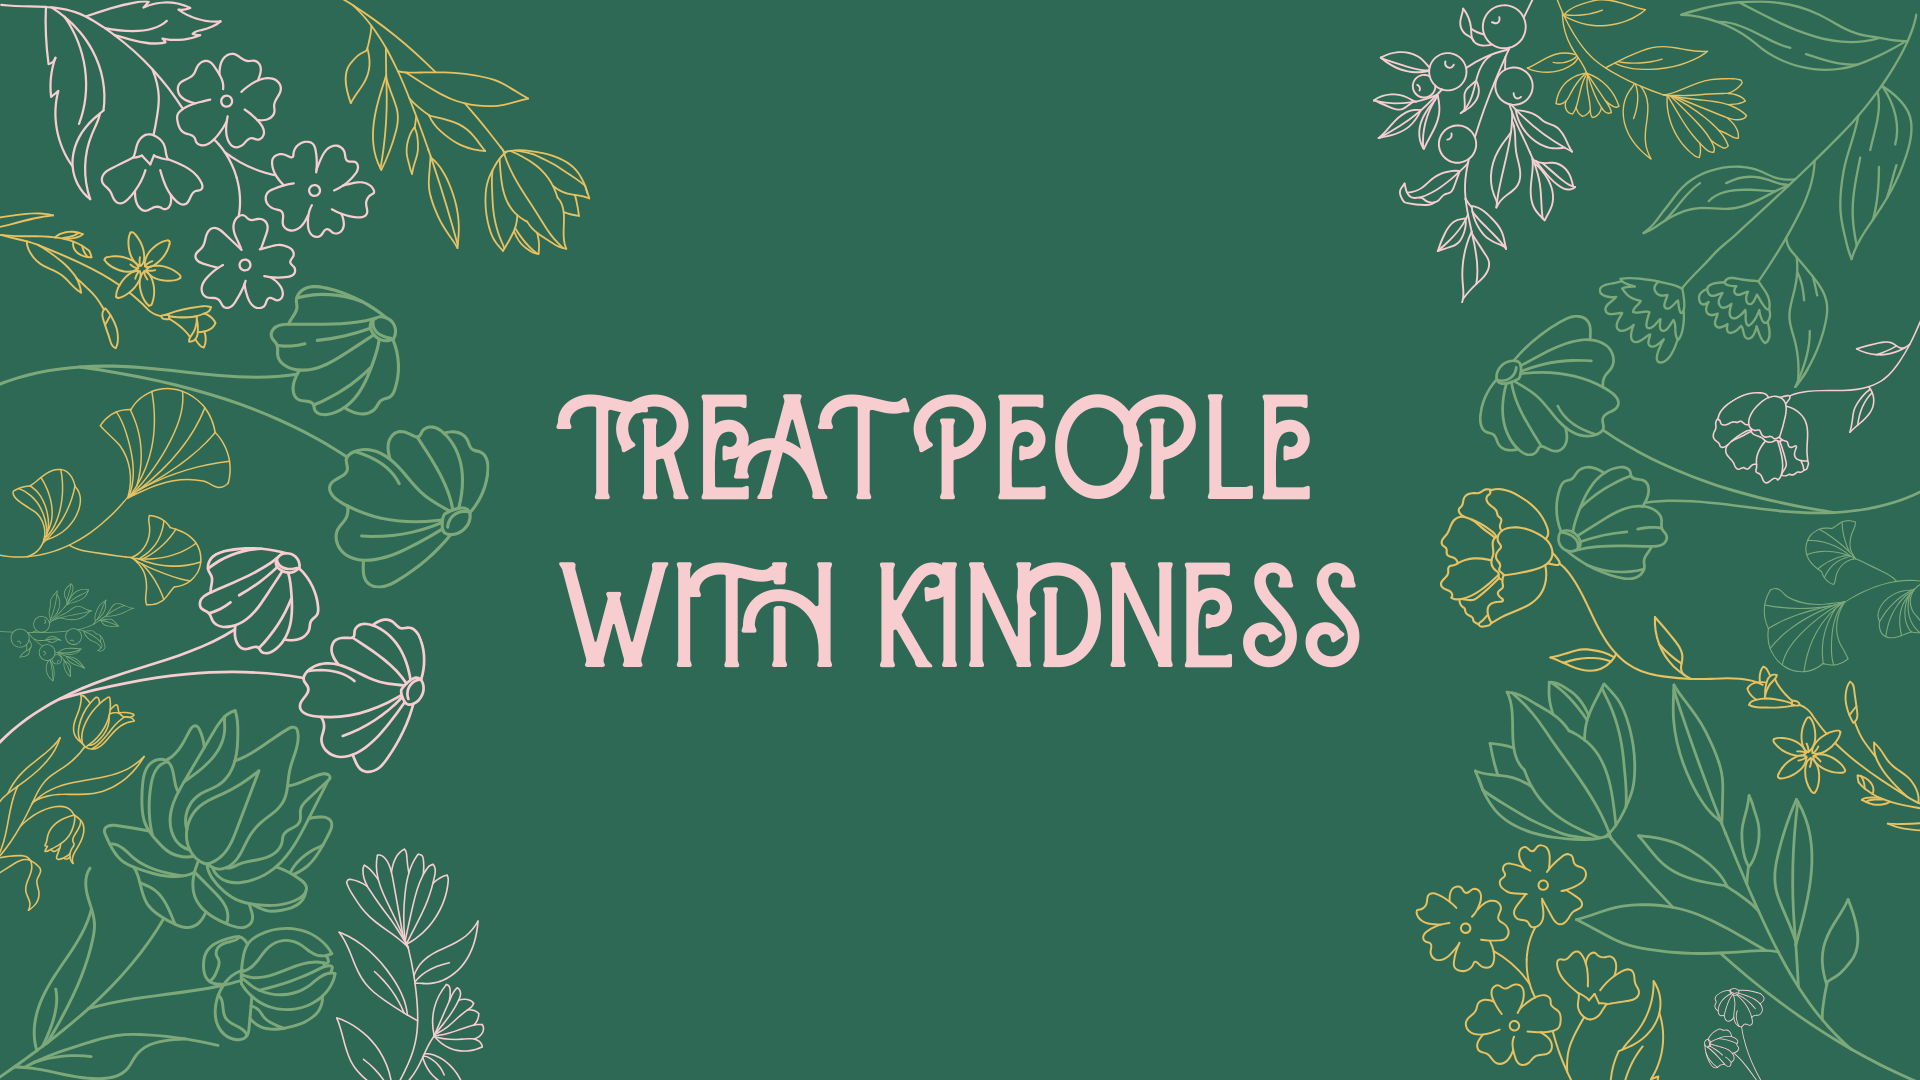 Treat people with kindness  widgetopia homescreen widgets for iPhone   iPad  Android